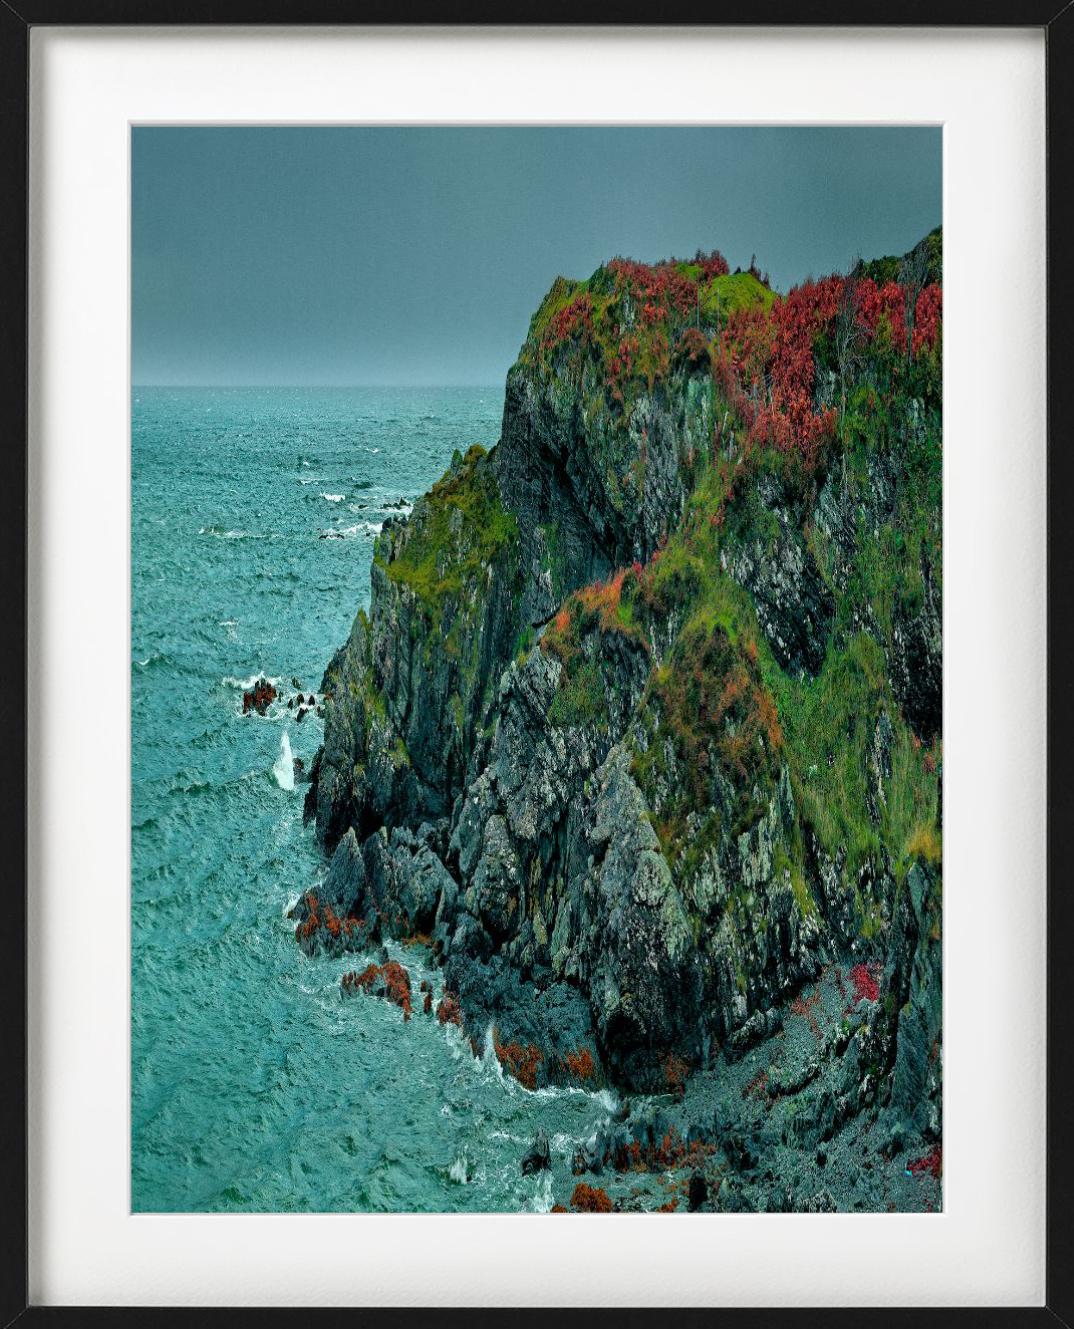 'Coral Beach VII' - green and red trees on cliffs, fine art photography, 2013 - Contemporary Photograph by Albert Watson